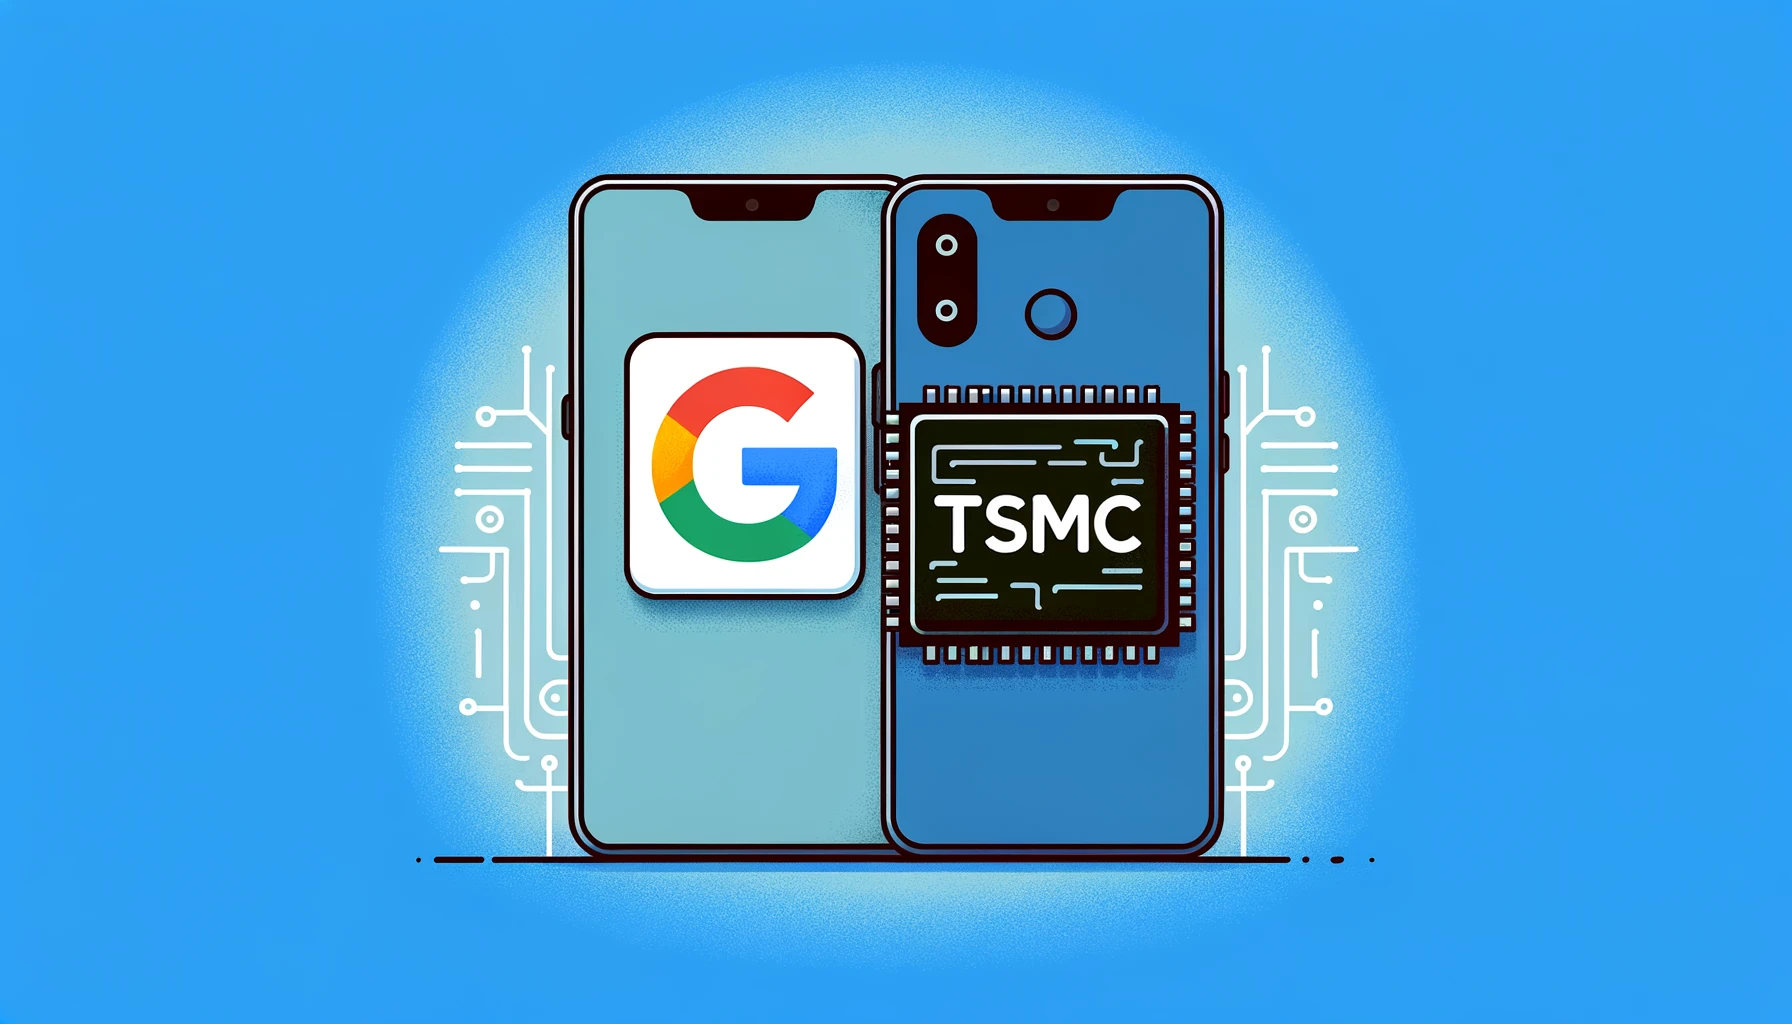 Google may consider transitioning to TSMC for upcoming Pixel phone chipsets